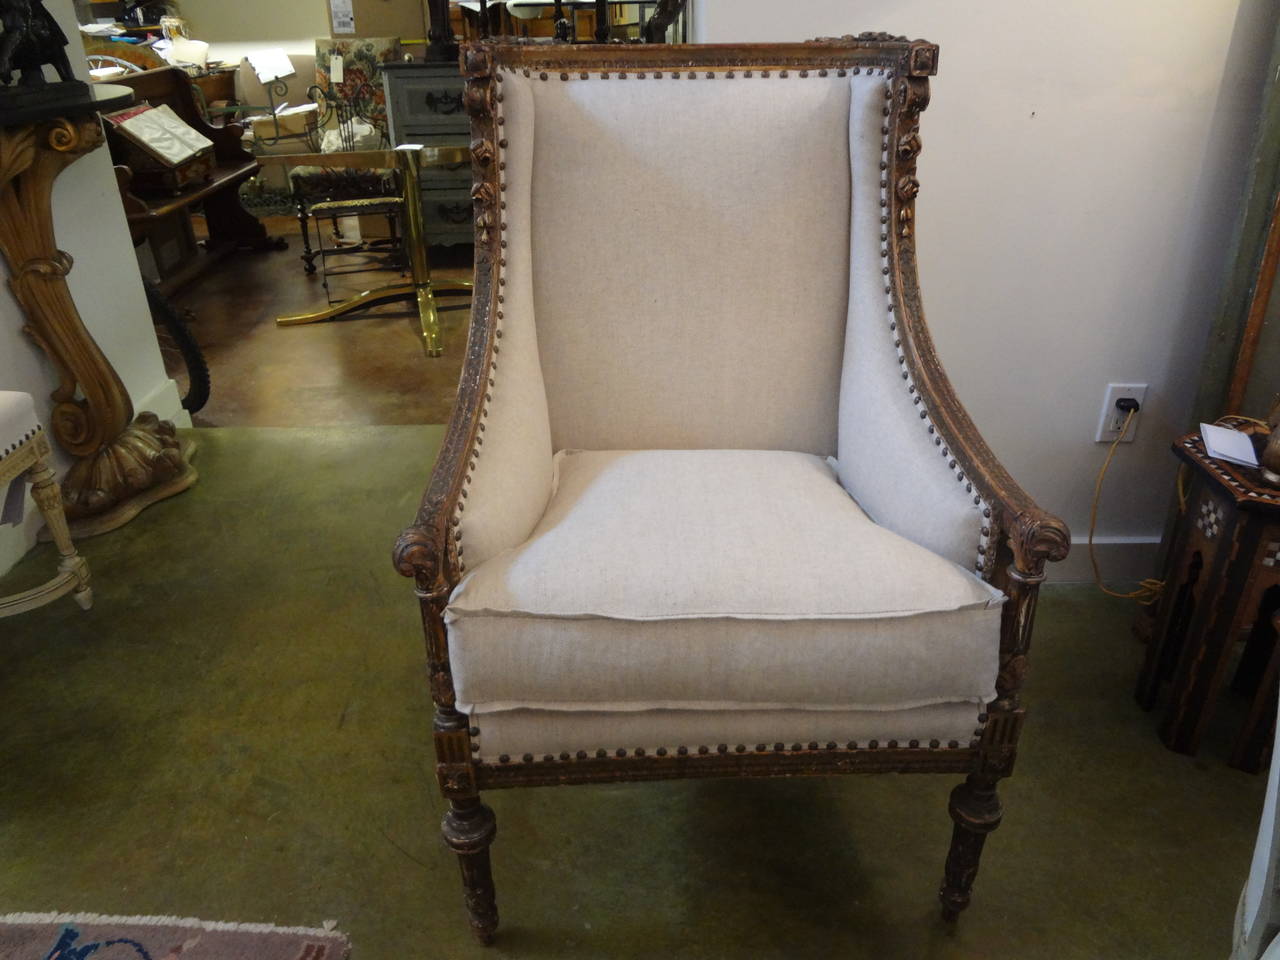 Stylish French Directoire or Neoclassical style gilt wood bergere with soft aged patina.
Newly upholstered in oatmeal linen with down wrapped cushion and spaced French nailhead trim.

Please click KIRBY ANTIQUES logo below to view additional